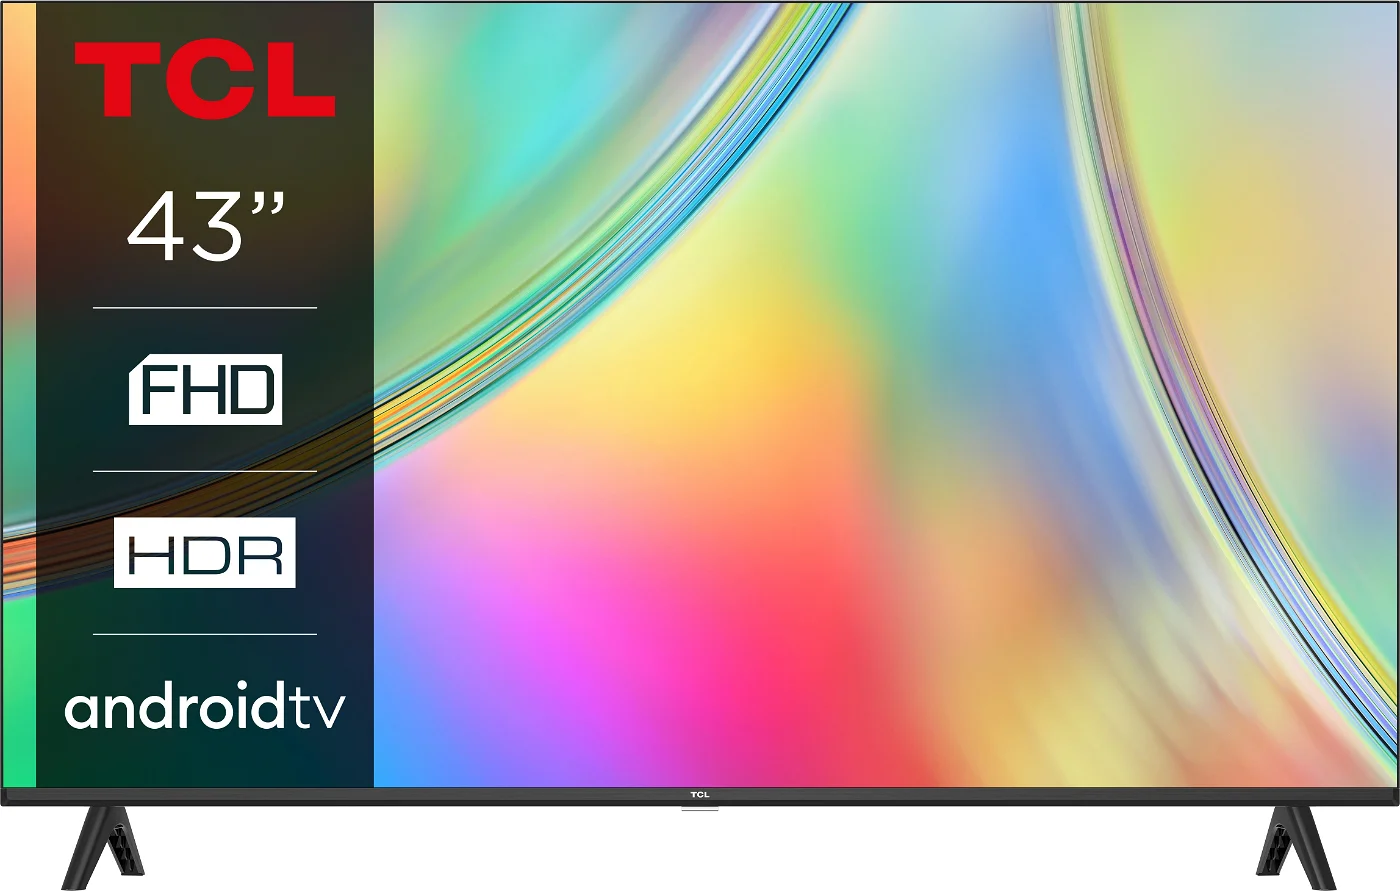 TCL 43S5400A 43S5400A - Full HD Android LED TV